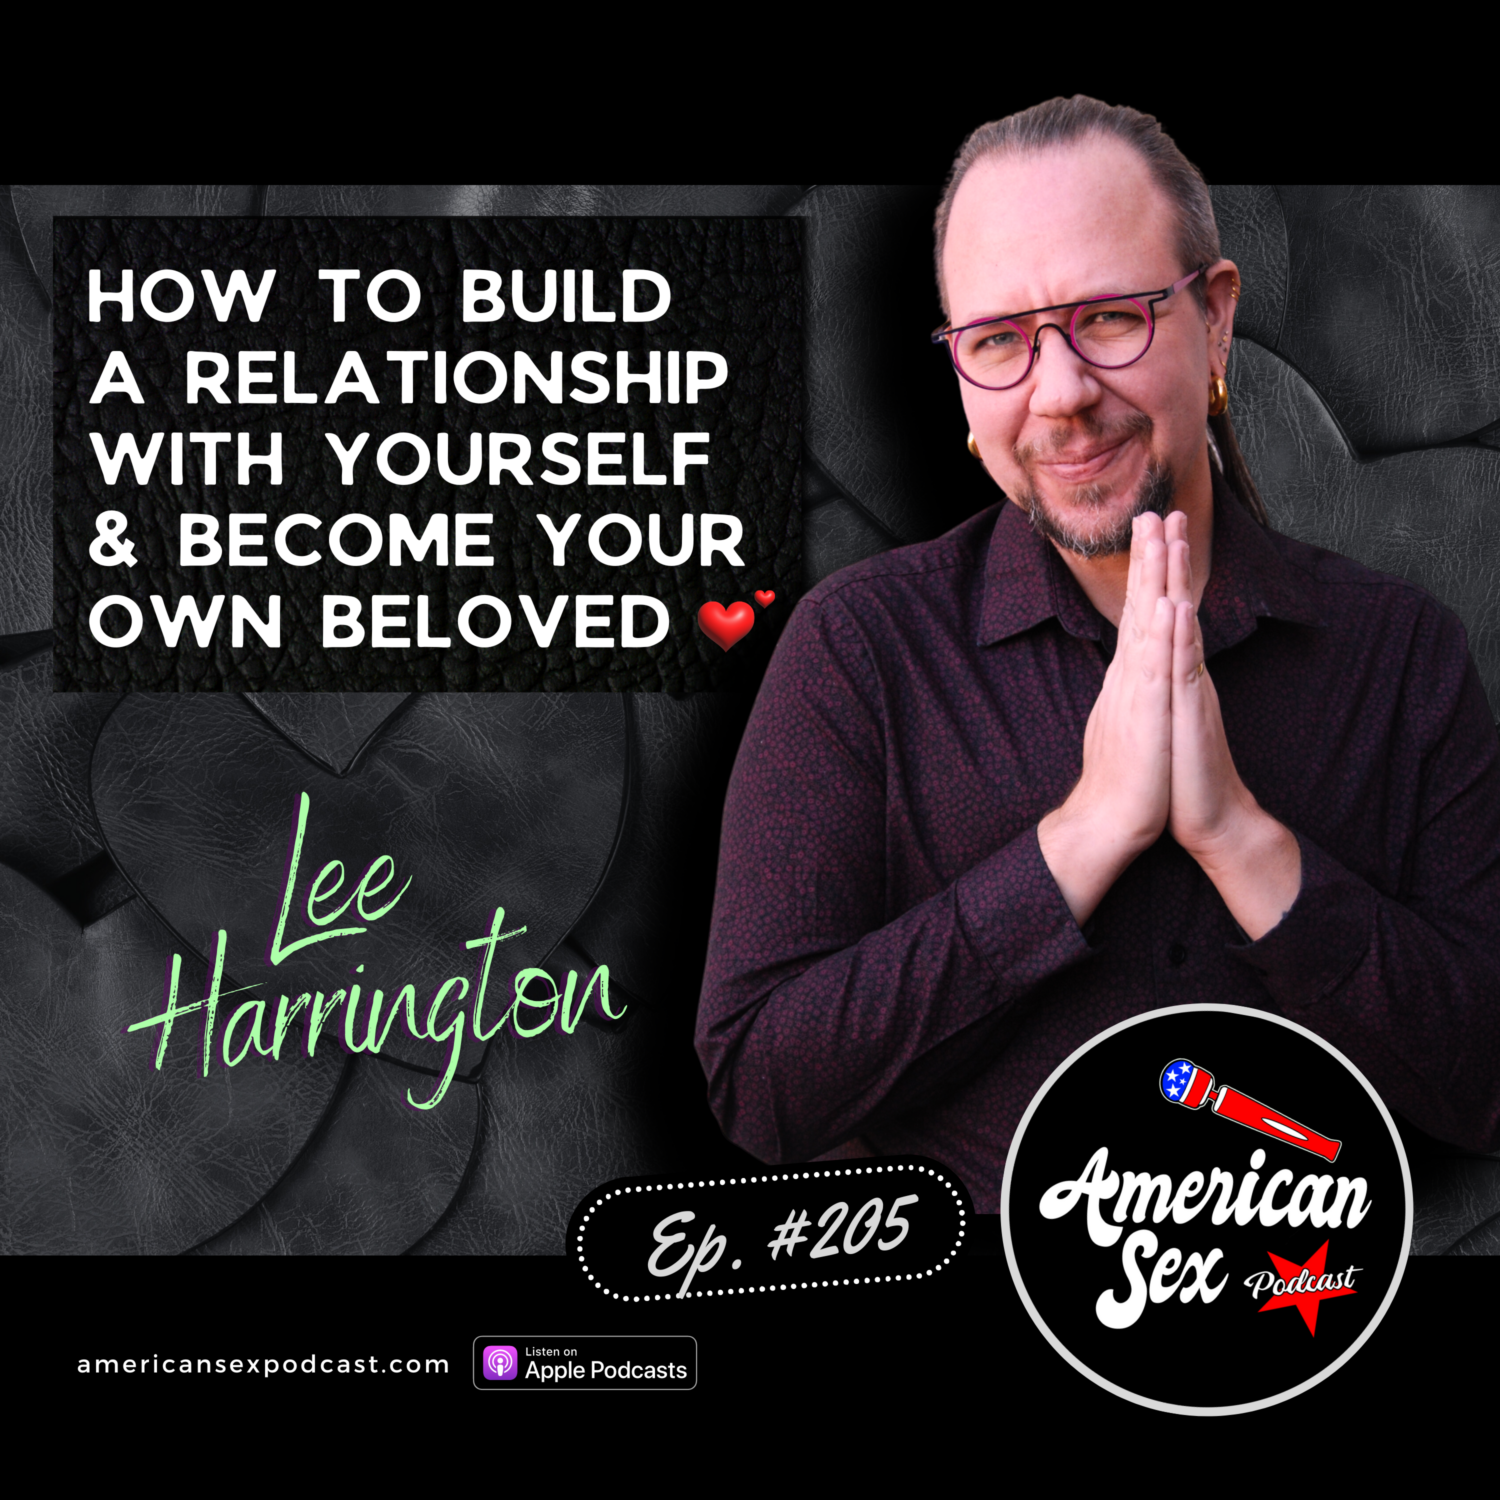 How-to-Love-Yourself-Lee-Harrington-American-Sex-Podcast-episode-205-1500x1500.png